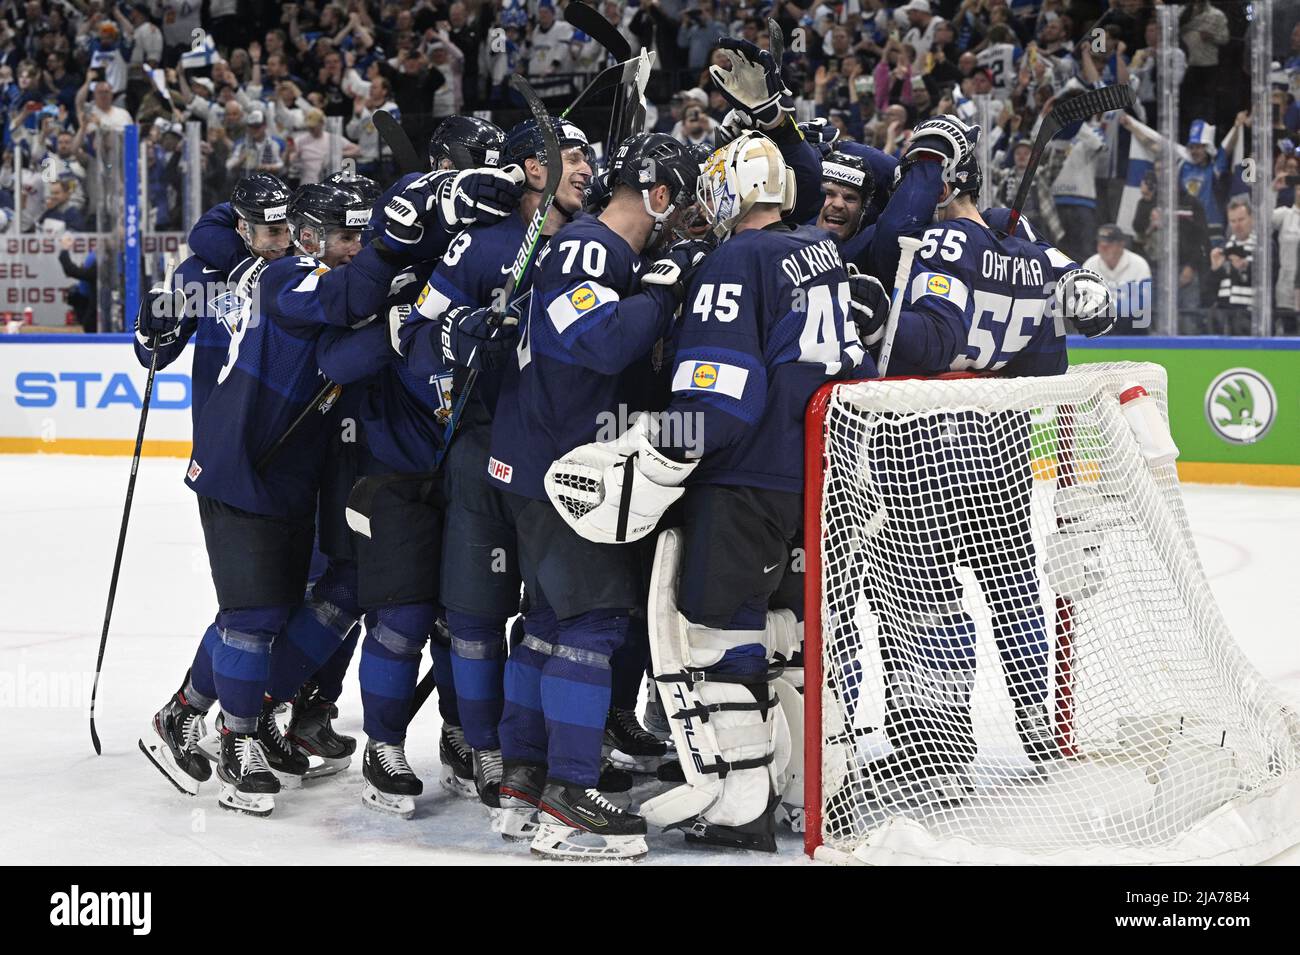 Tampere, Finland. 28th May, 2022. Hockey players of Finland celebrate a victory after the 2022 IIHF Ice Hockey World Championship semifinals match Finland vs